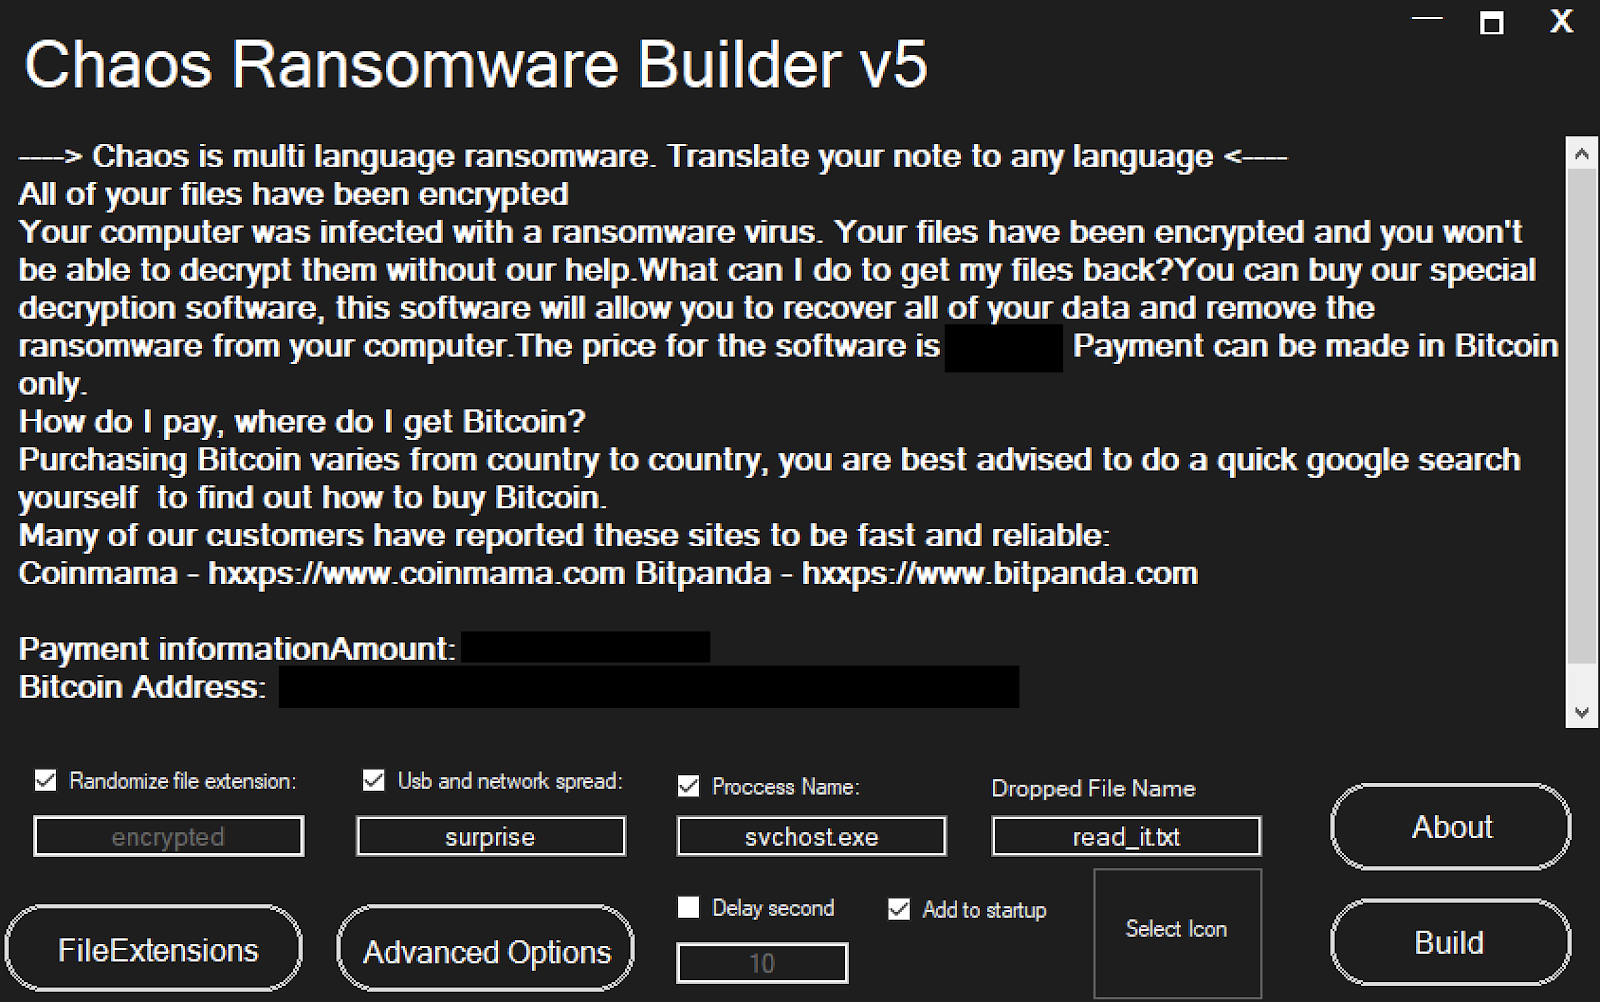 Code leaks are causing an influx of new ransomware actors